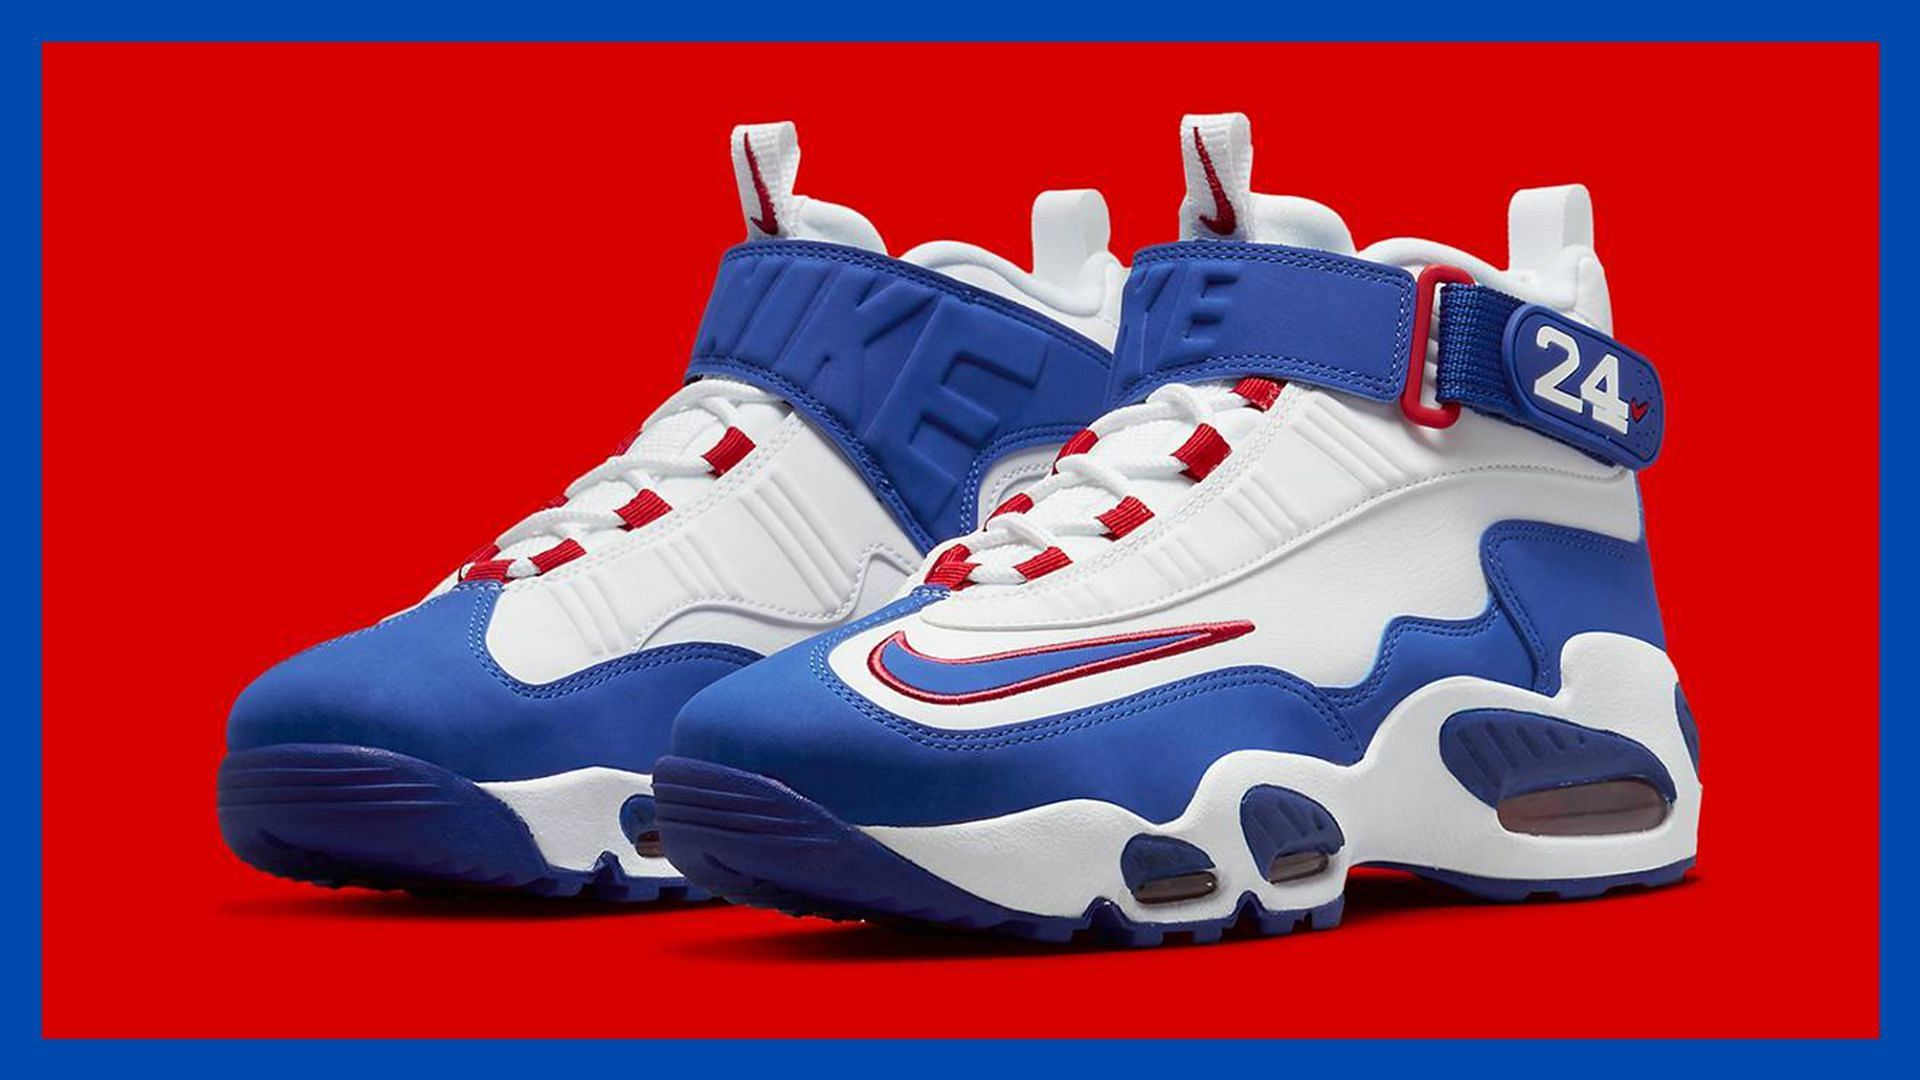 Where to buy Griffey Max 1 USA shoes? Price and more details explored